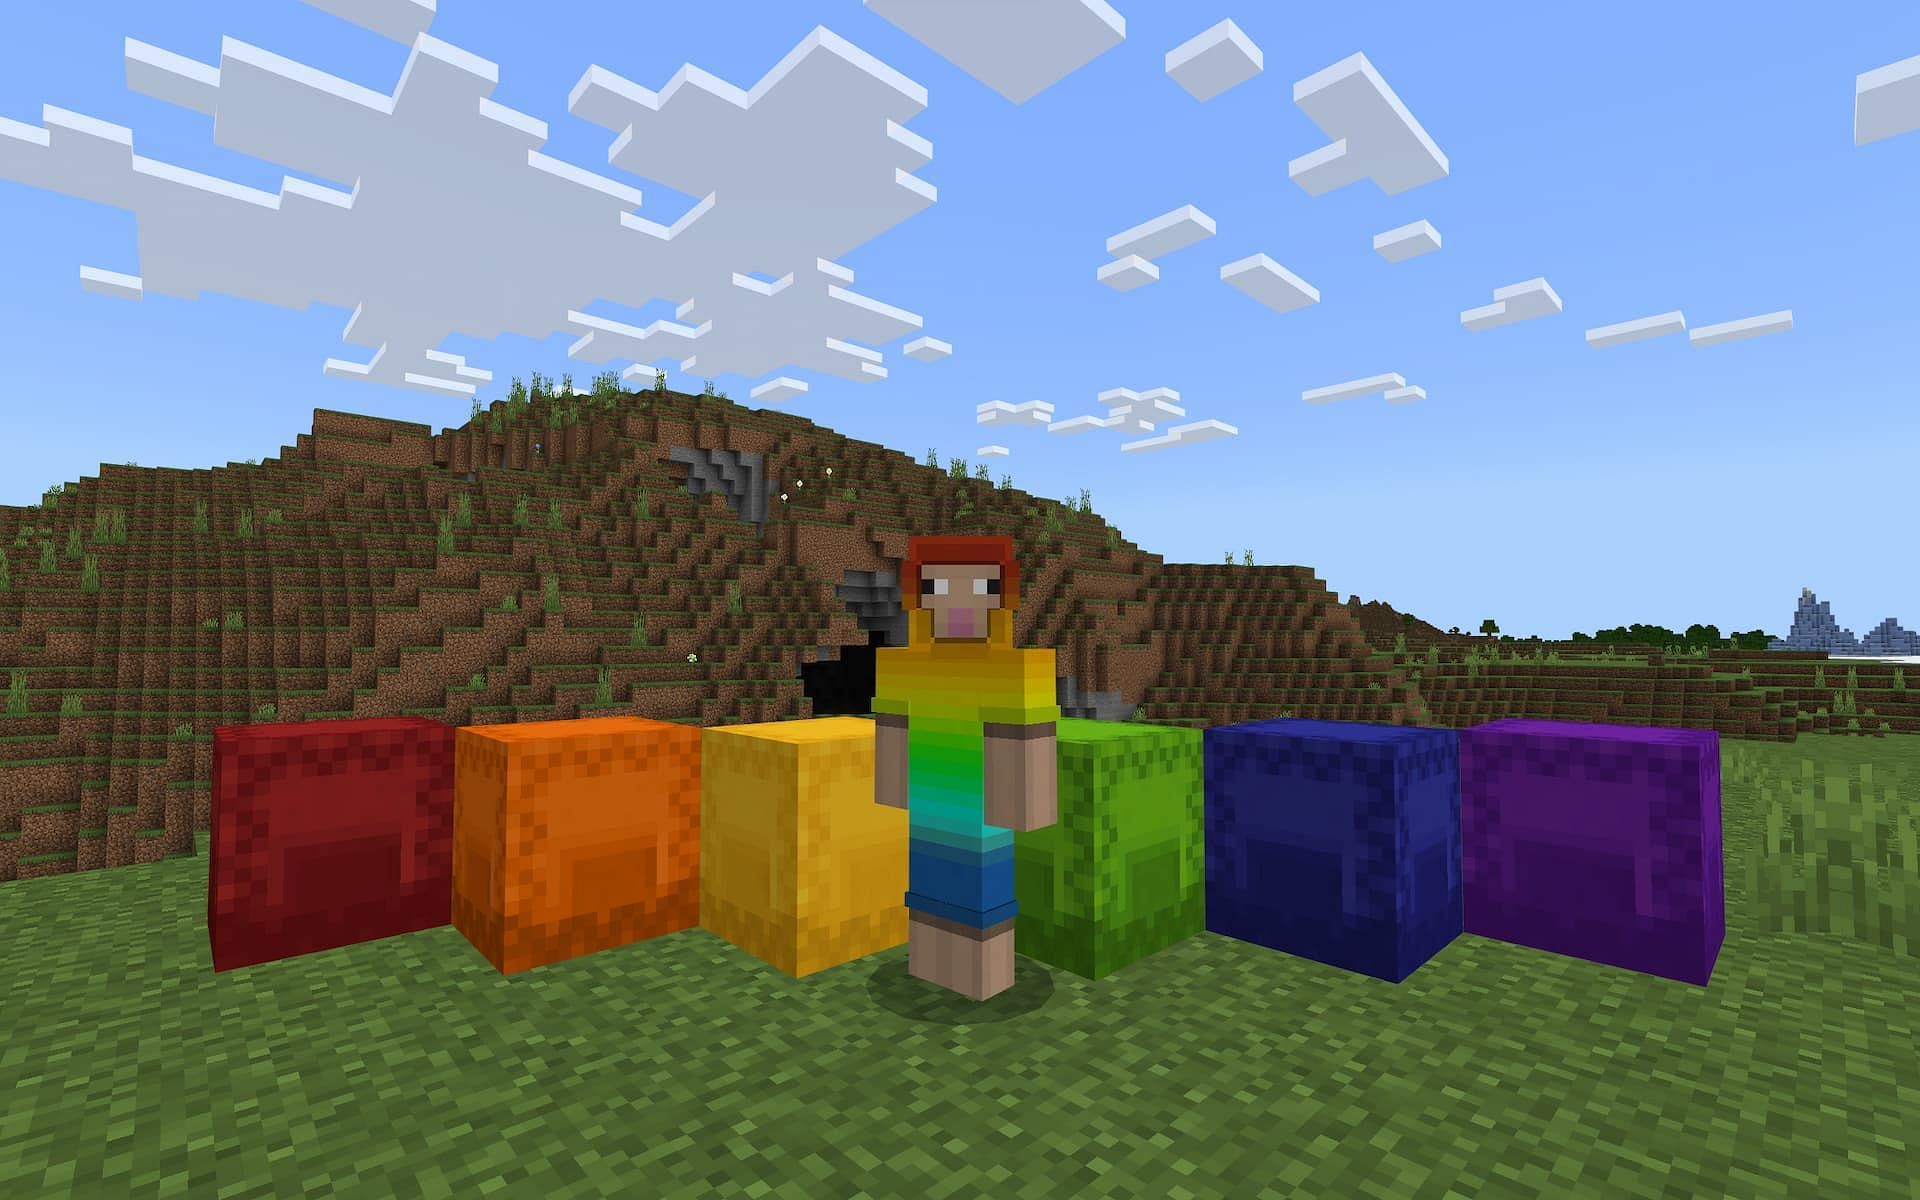 A rainbow sheep avatar stands in front of multiple colors of Shulker Boxes arranged in a rainbow